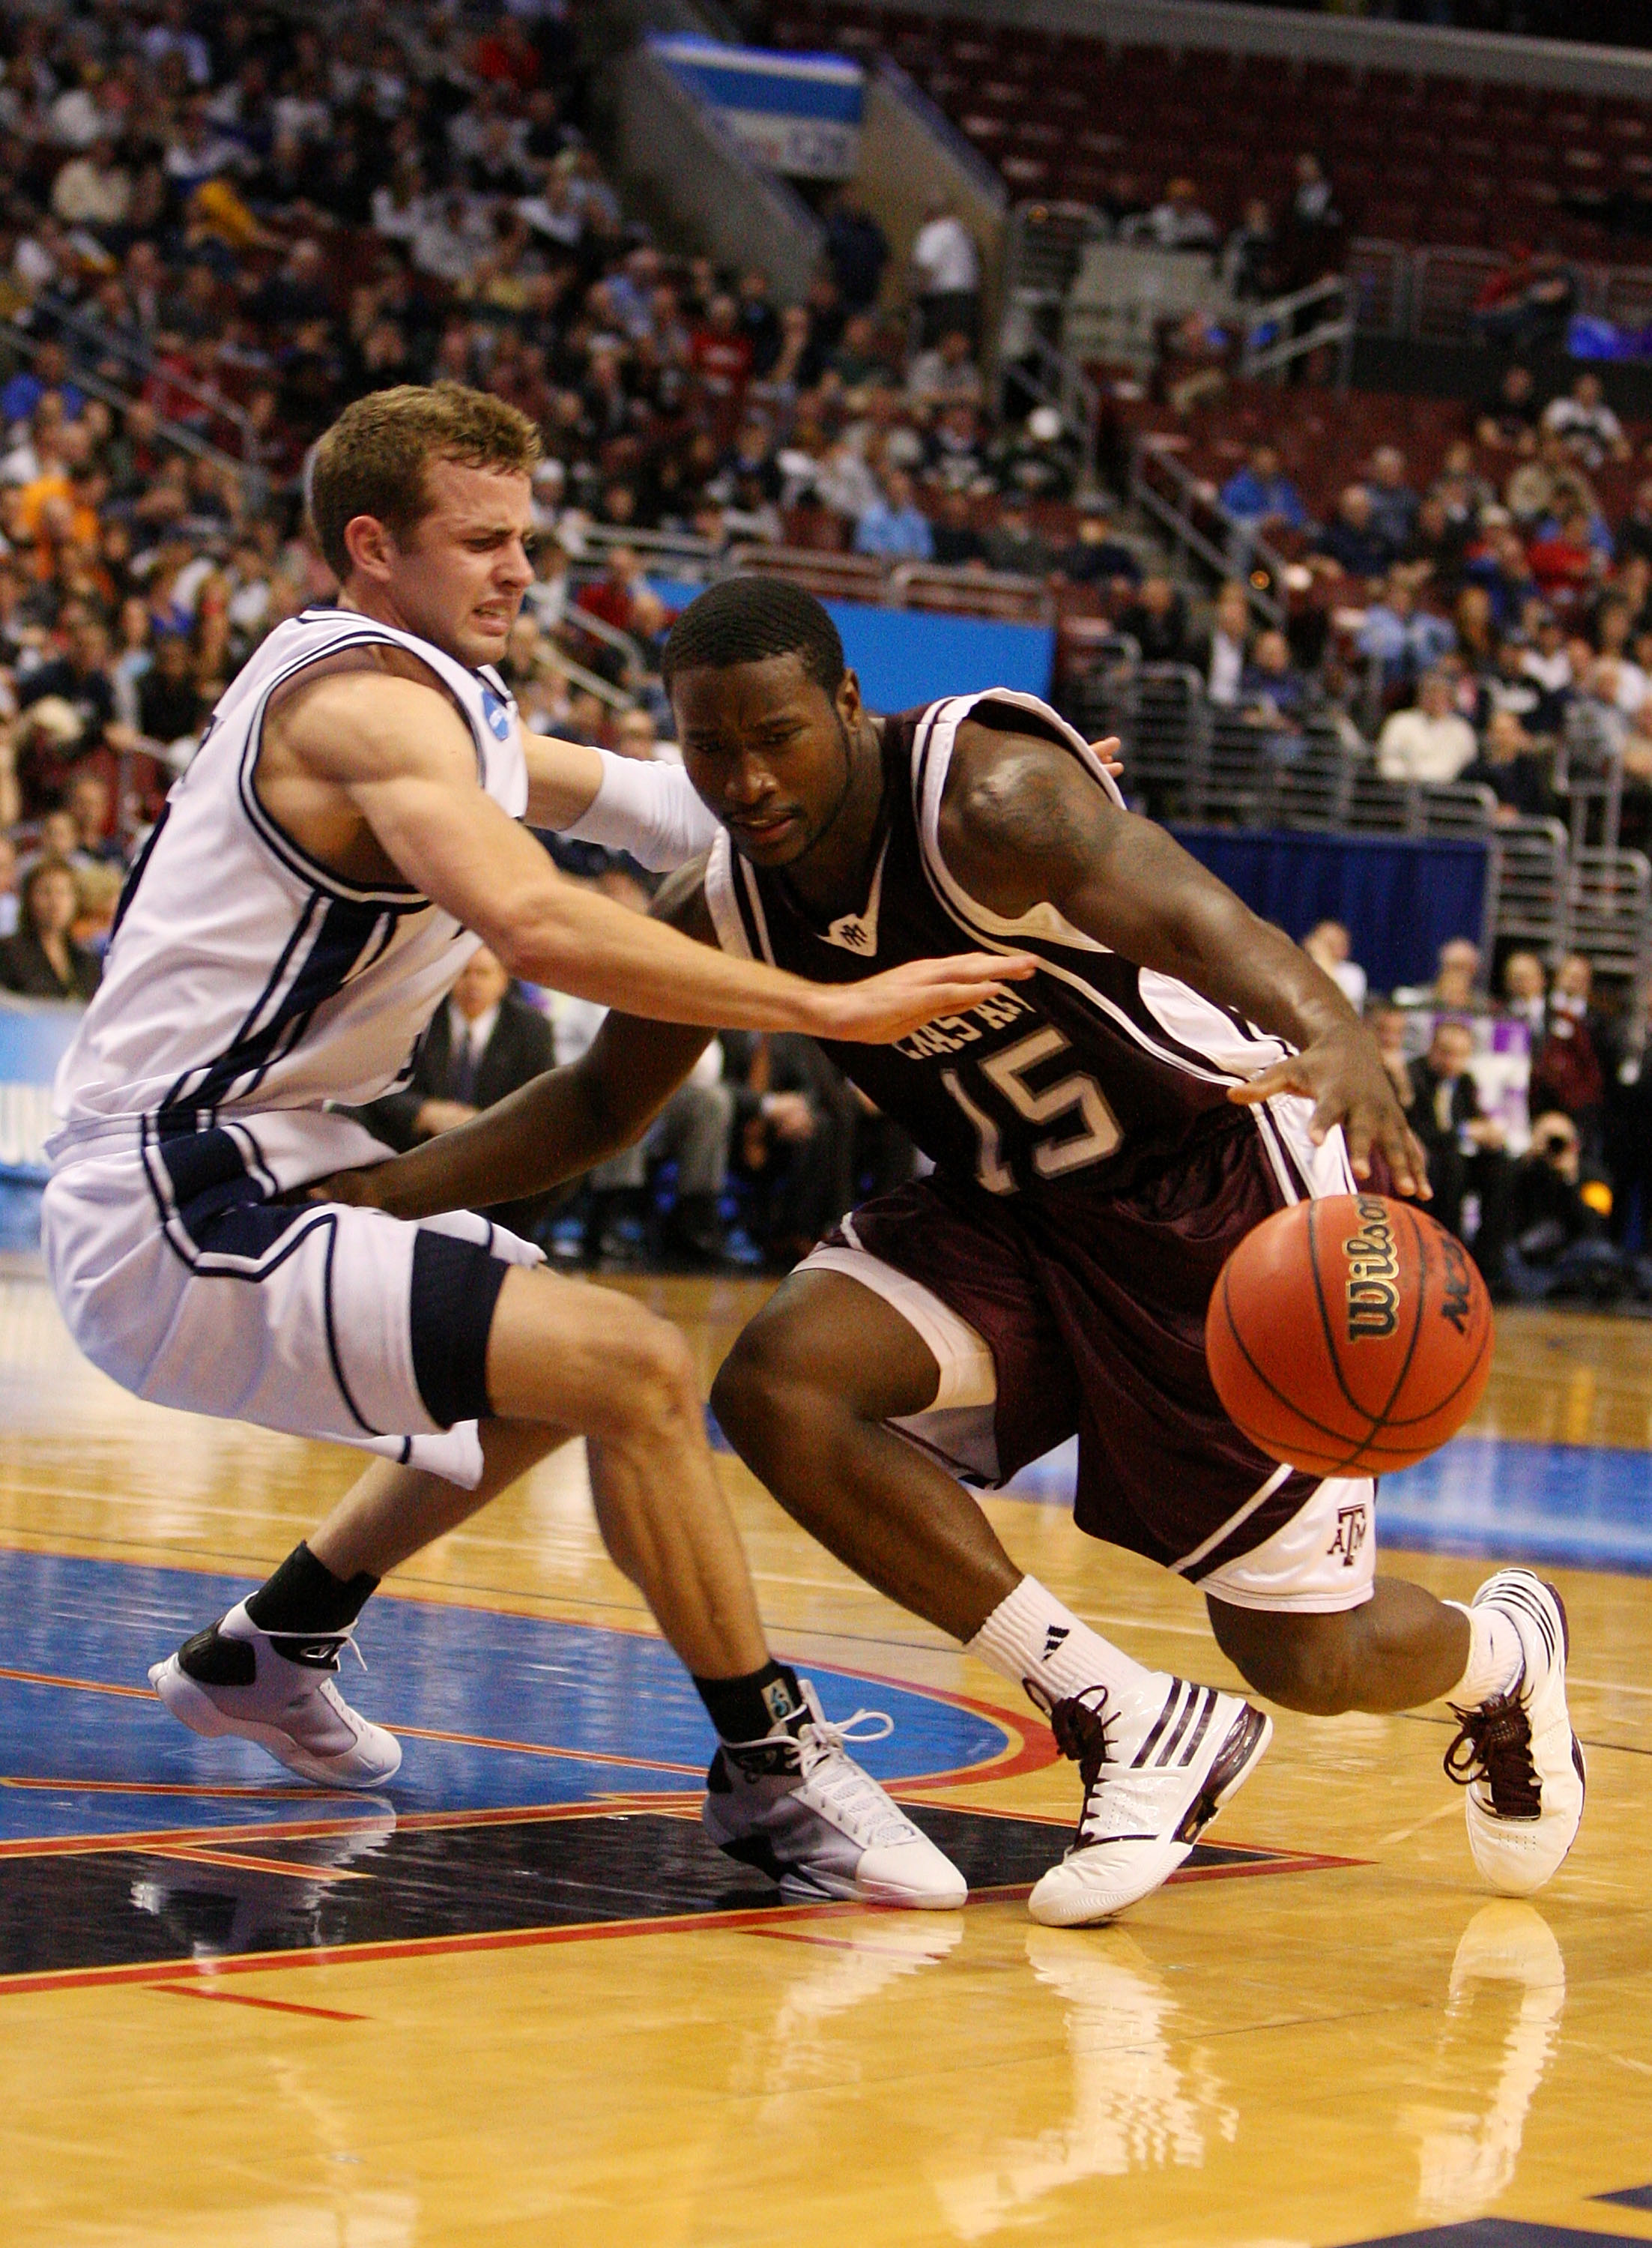 PHILADELPHIA - MARCH 19:  Donald Sloan #15 of the Texas A&M Aggies drives against Jackson Emery #4 of the Brigham Young Cougars during the first round of the NCAA Division I Men's Basketball Tournament at the Wachovia Center on March 19, 2009 in Philadelp